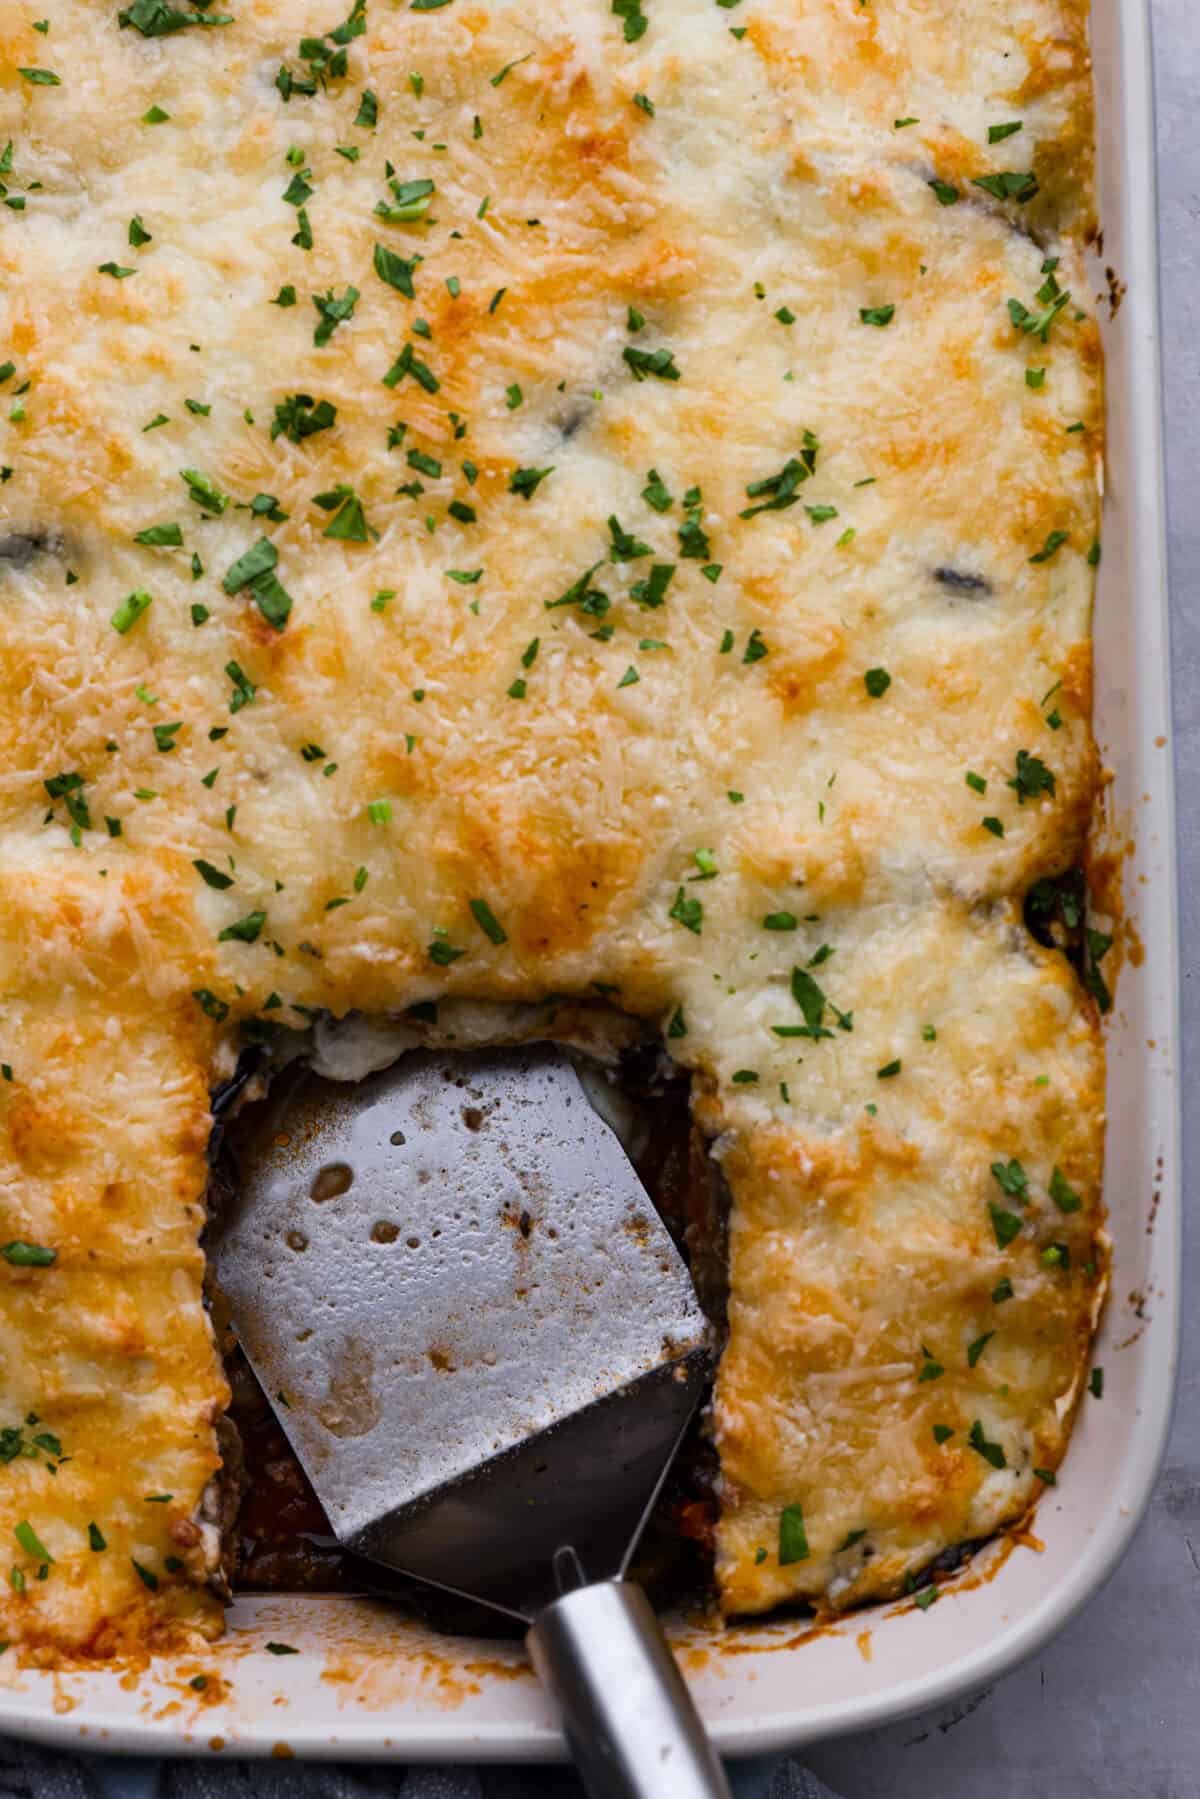 Top-down view of moussaka in a baking dish with a slice taken out of it.